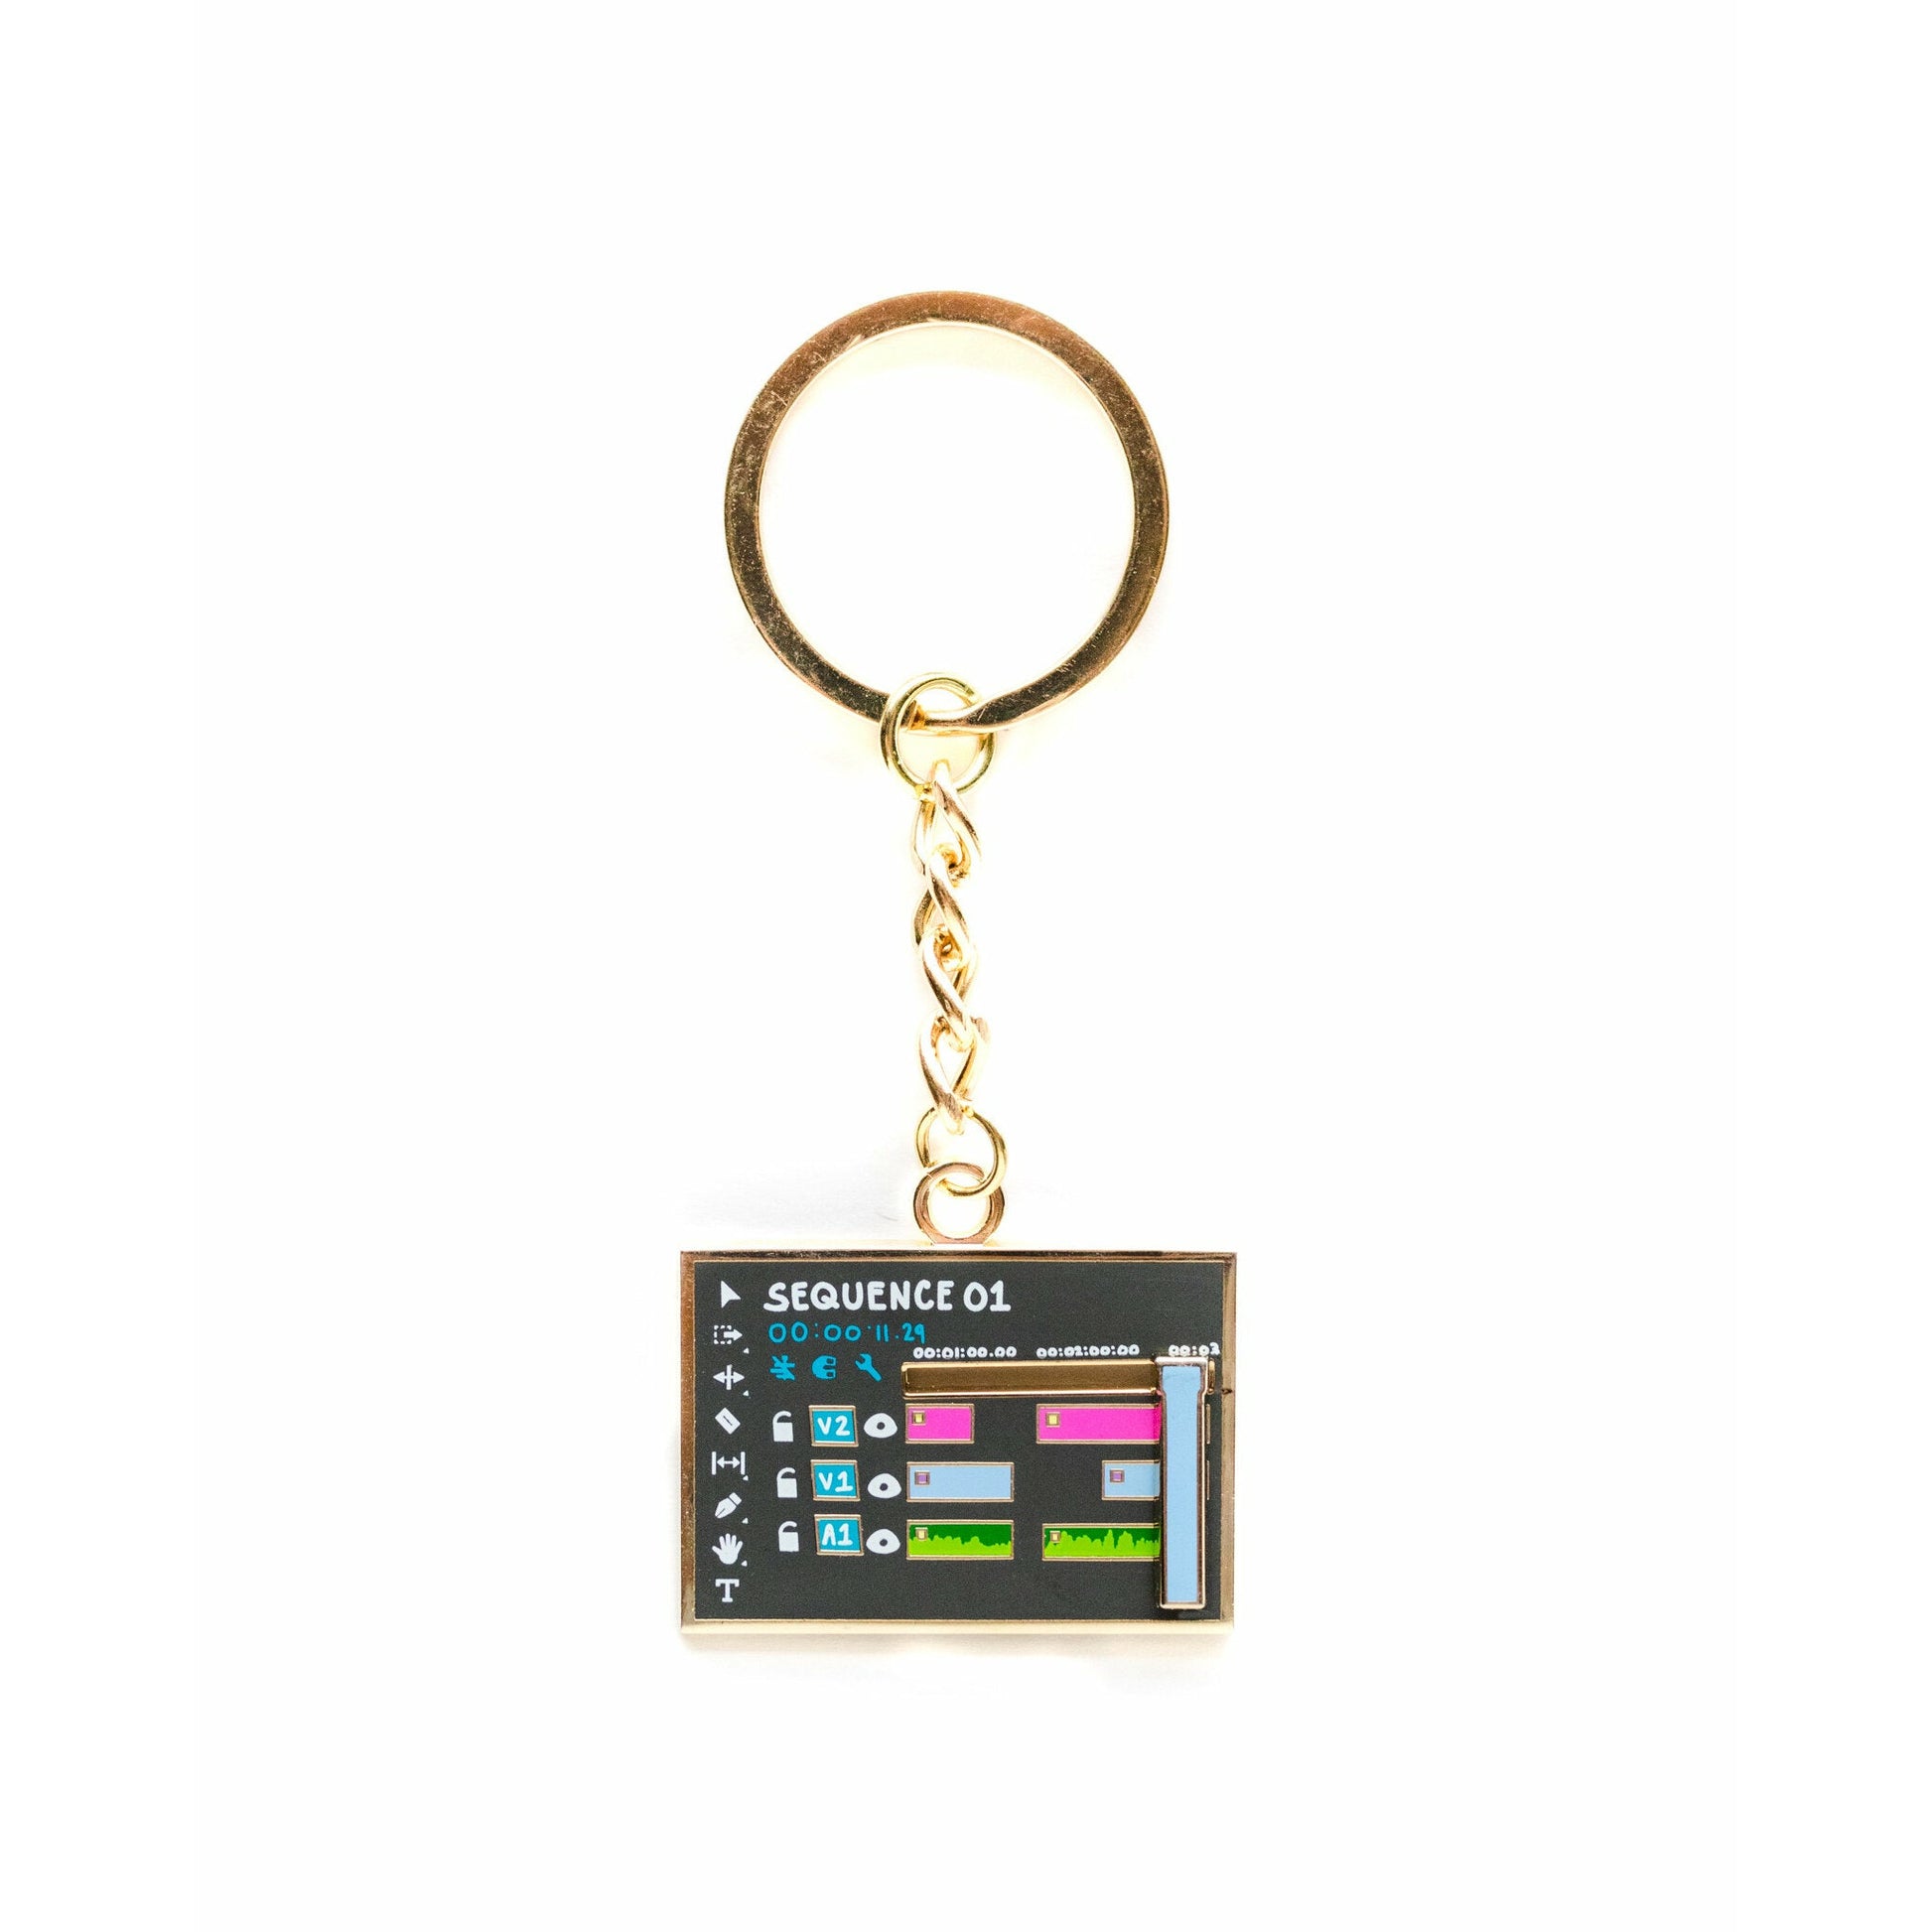 Video editor timeline key ring with white background 